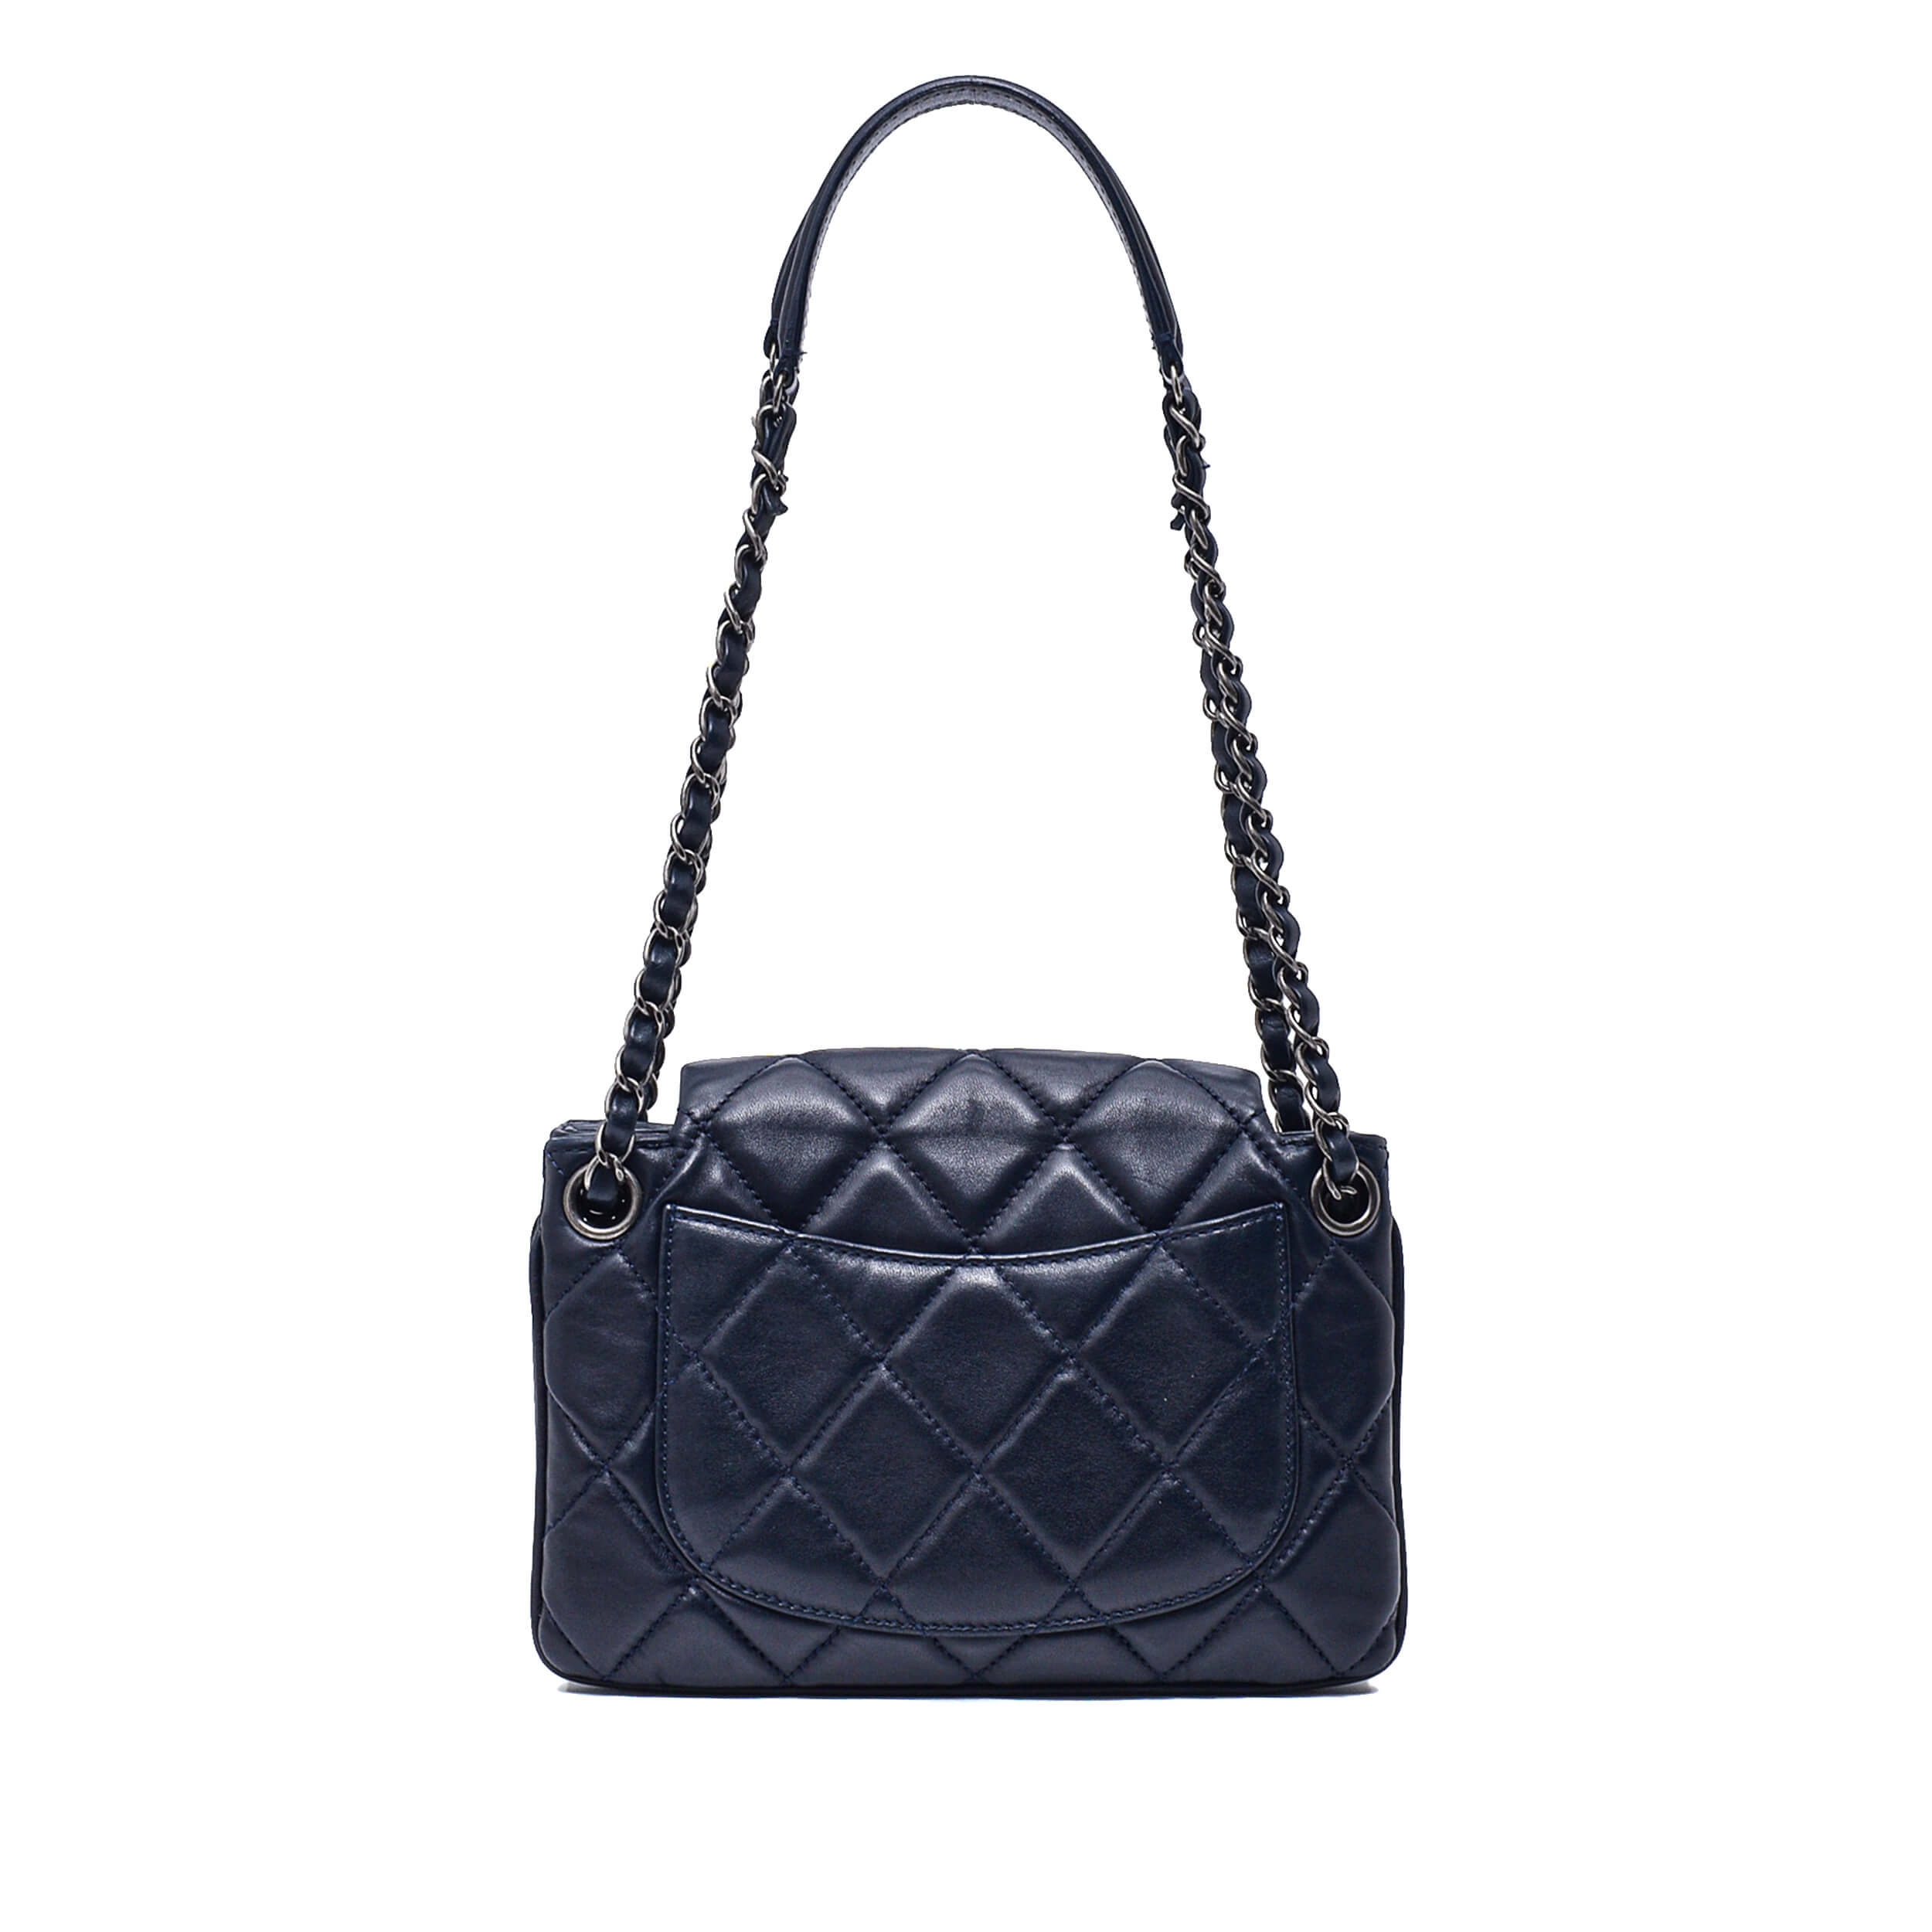 Chanel - Black Lambskin Quilted Leather Accordion Bag 